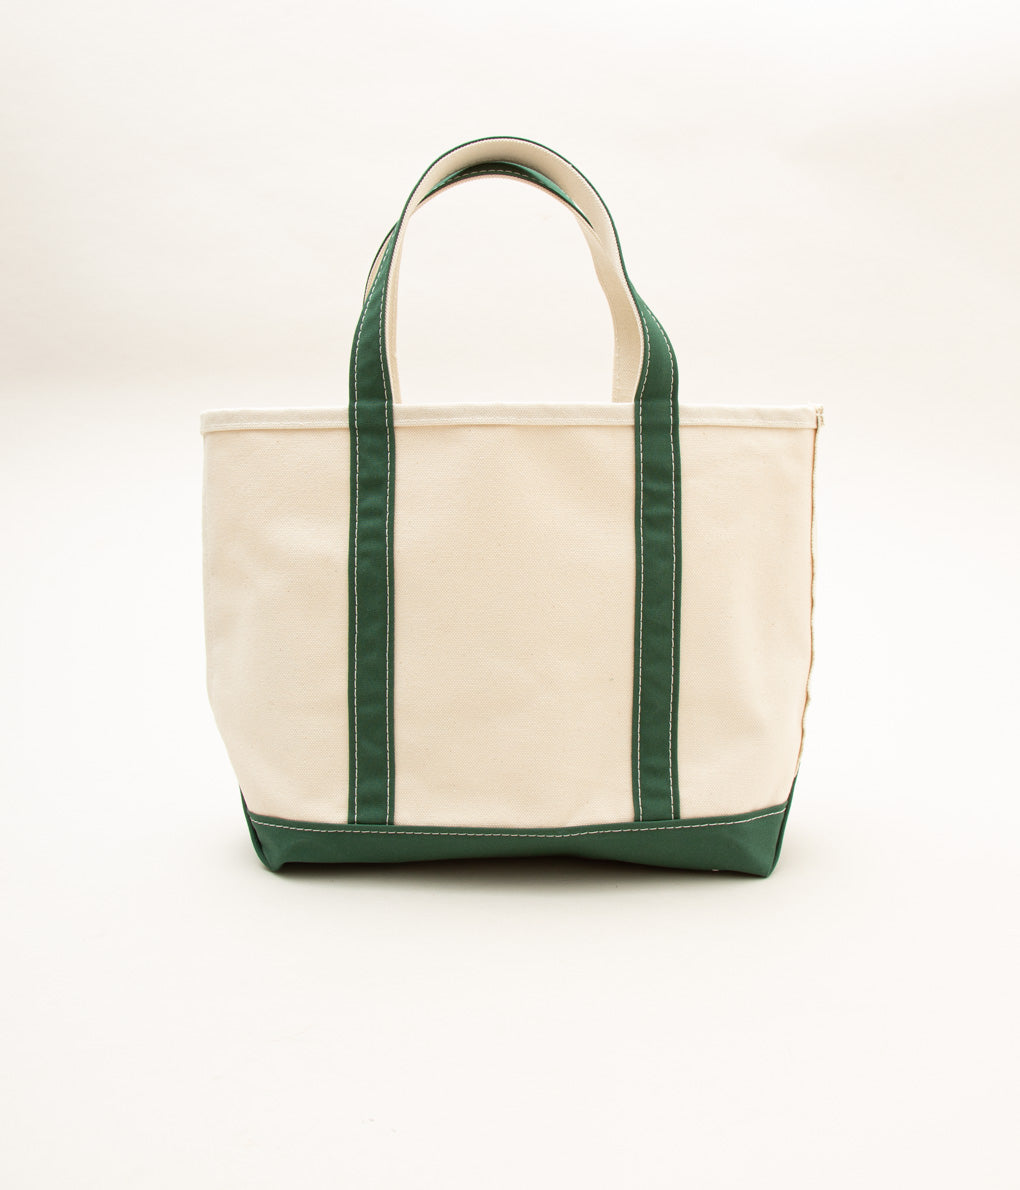 SOPH LL Bean BOAT AND TOTE LARGE トート 爆買い送料無料 - バッグ